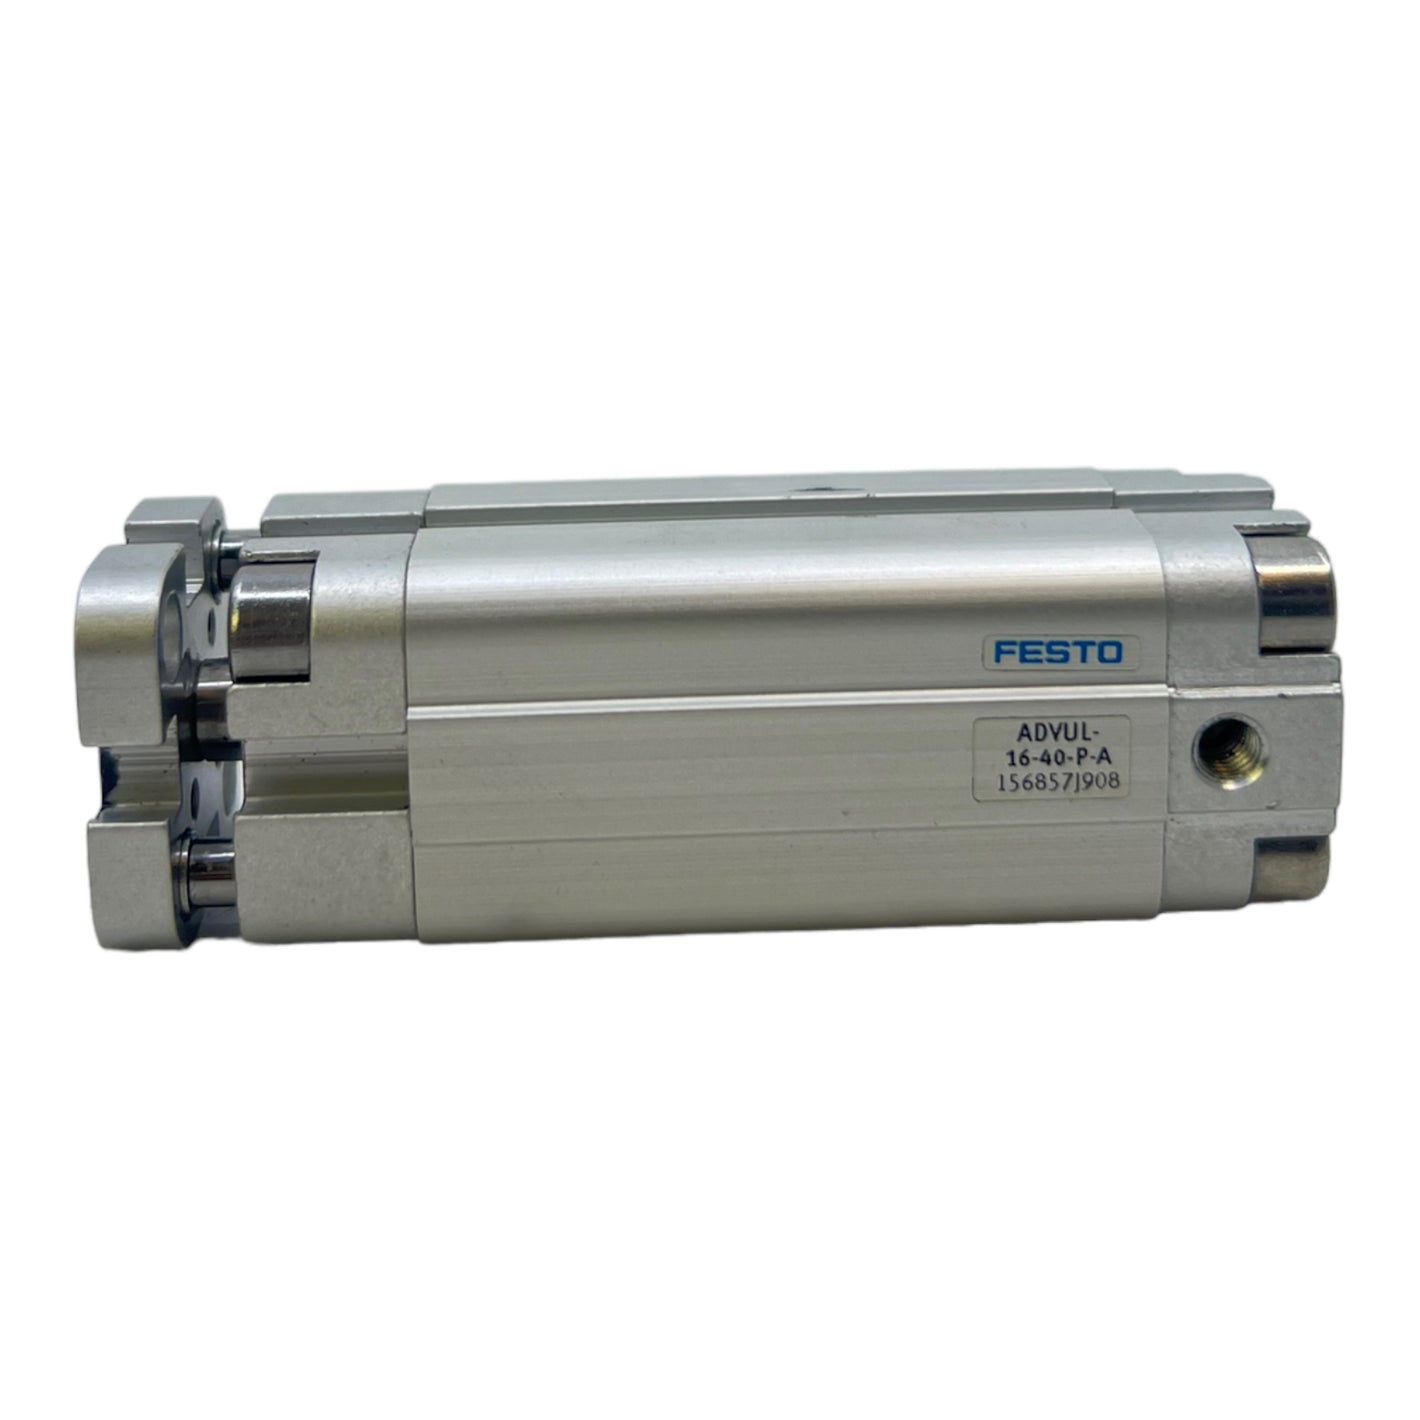 Festo ADVUL-16-40-PA compact cylinder 156857 pneumatic cylinder 1.2 to 10 bar 